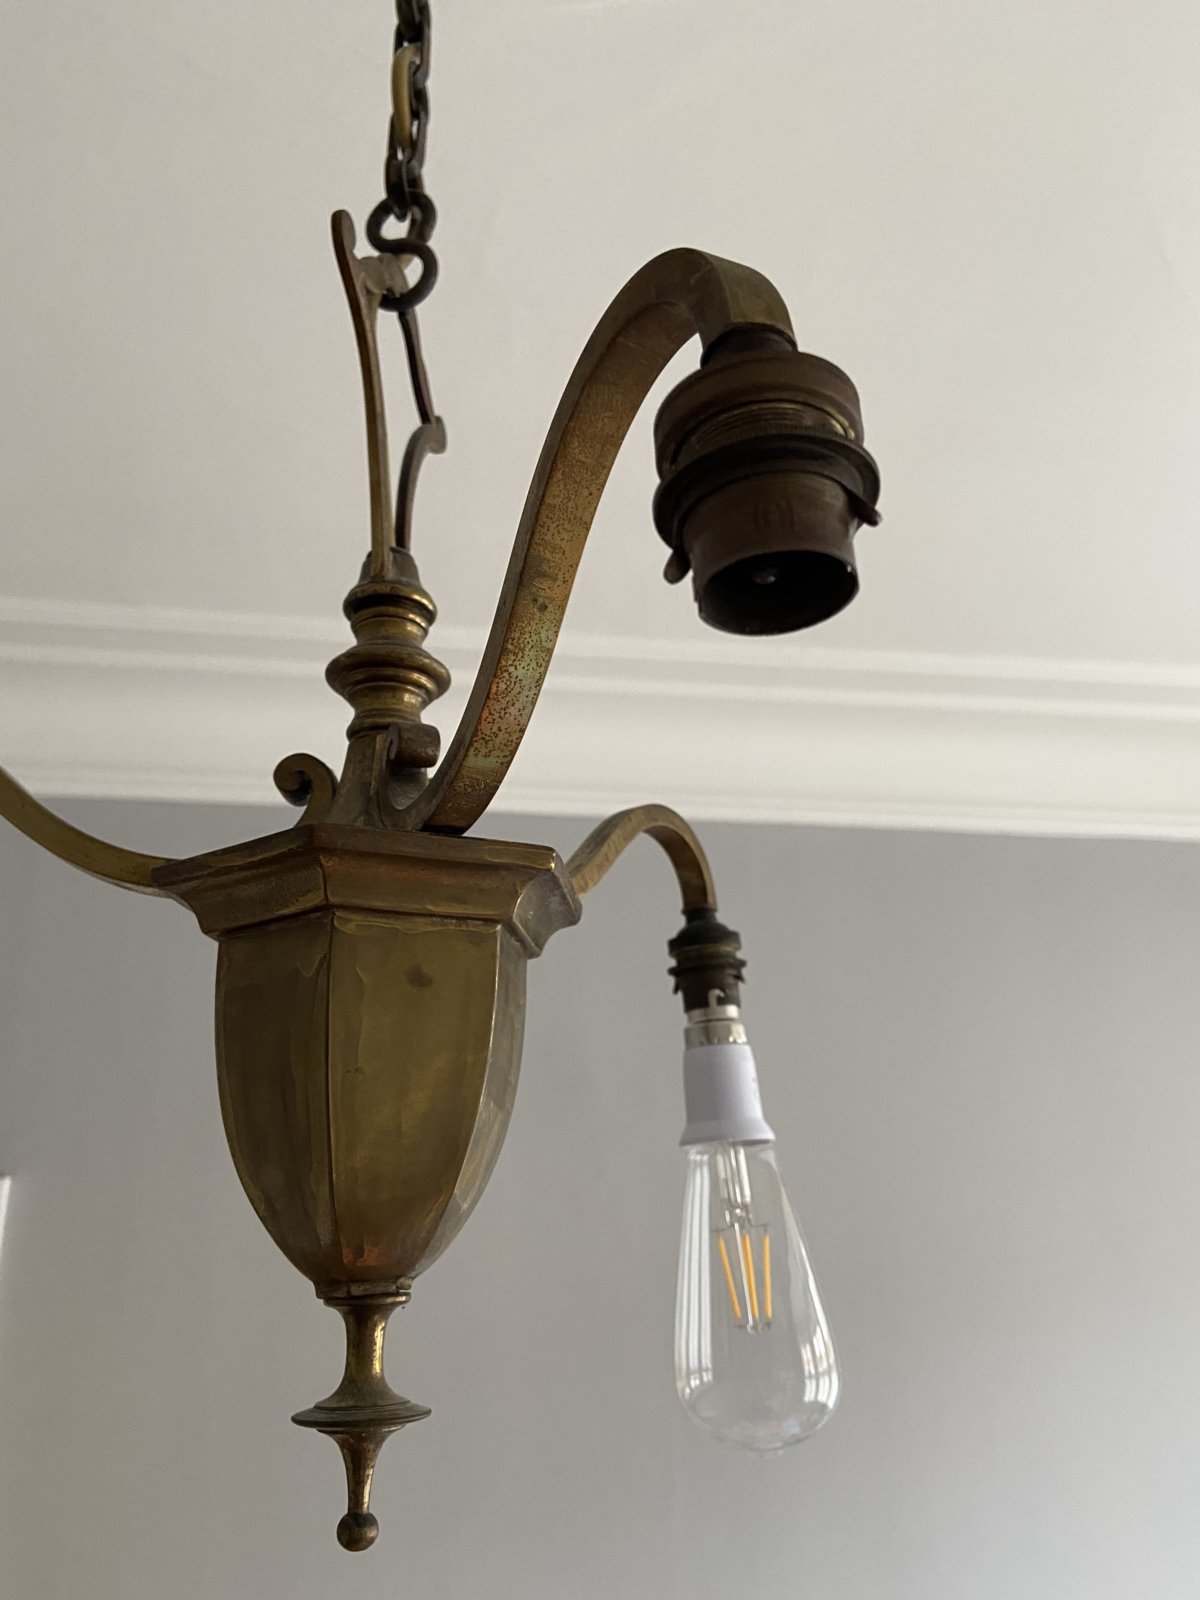 How to fix old flickering light | DIYnot Forums